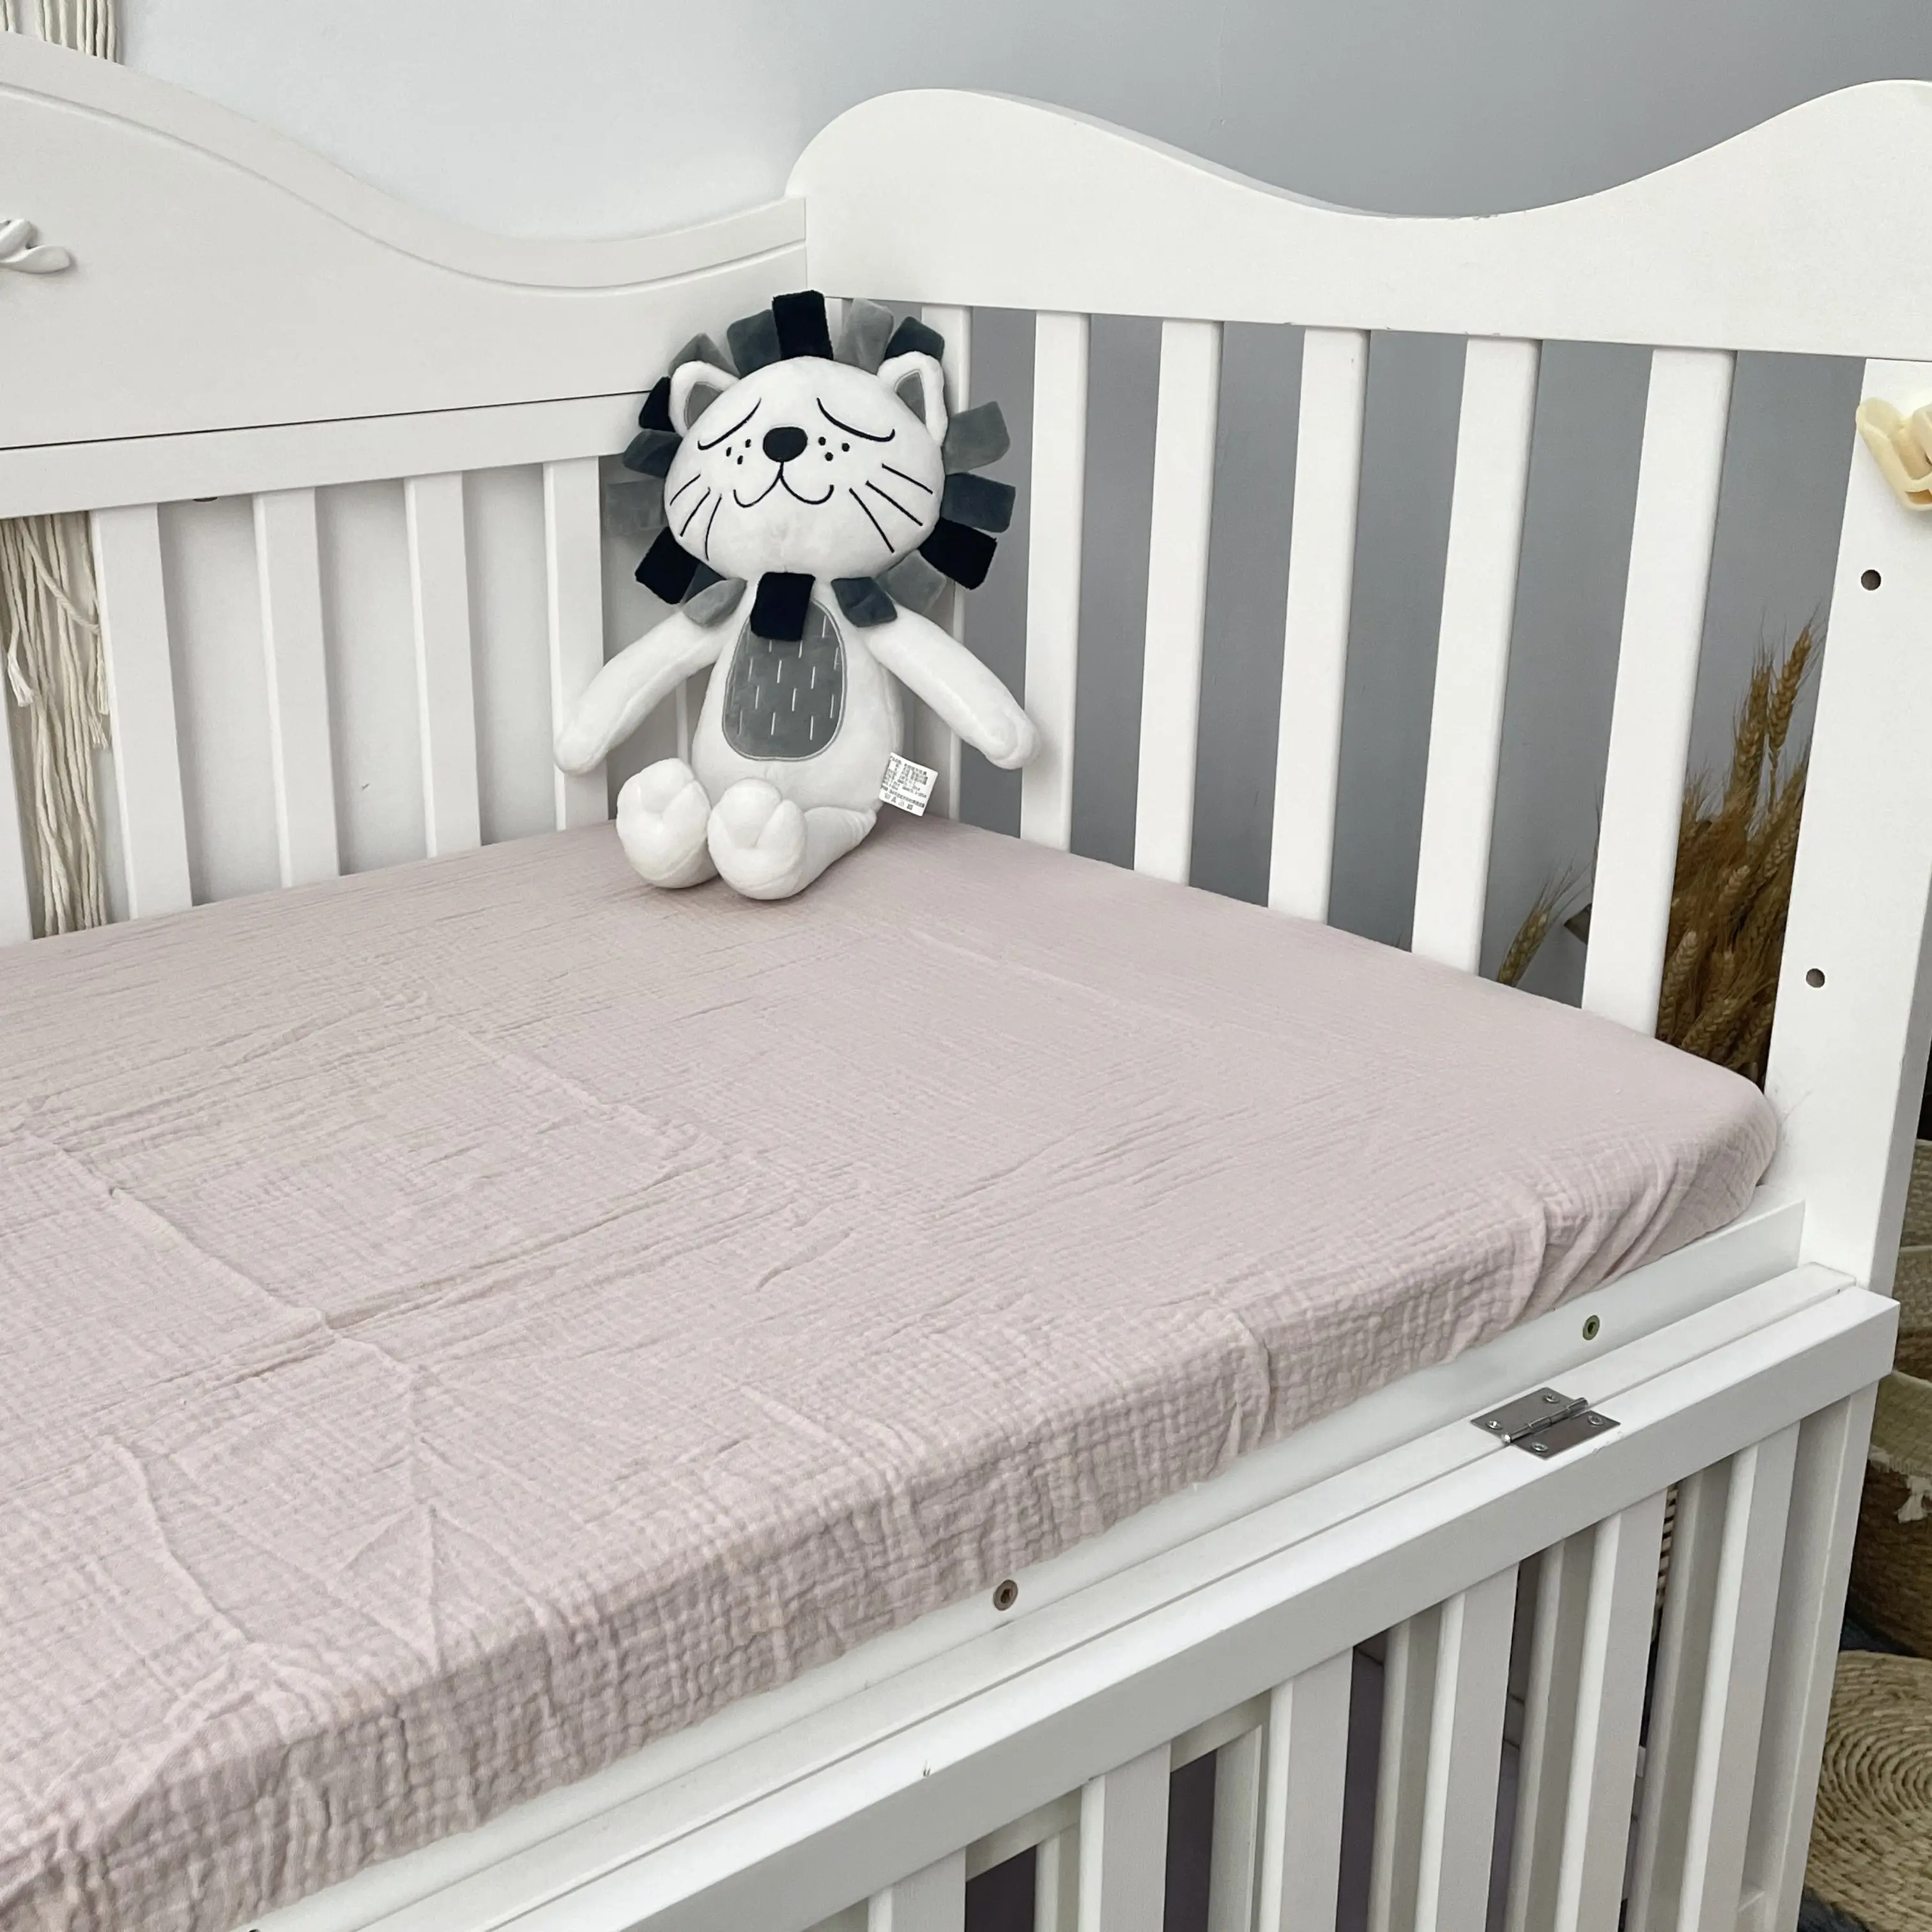 2021 New Design Premium Quality Cuddly Muslin Fitted Crib Sheet Lightweight Super Soft Easy Care Baby Bedding For Baby